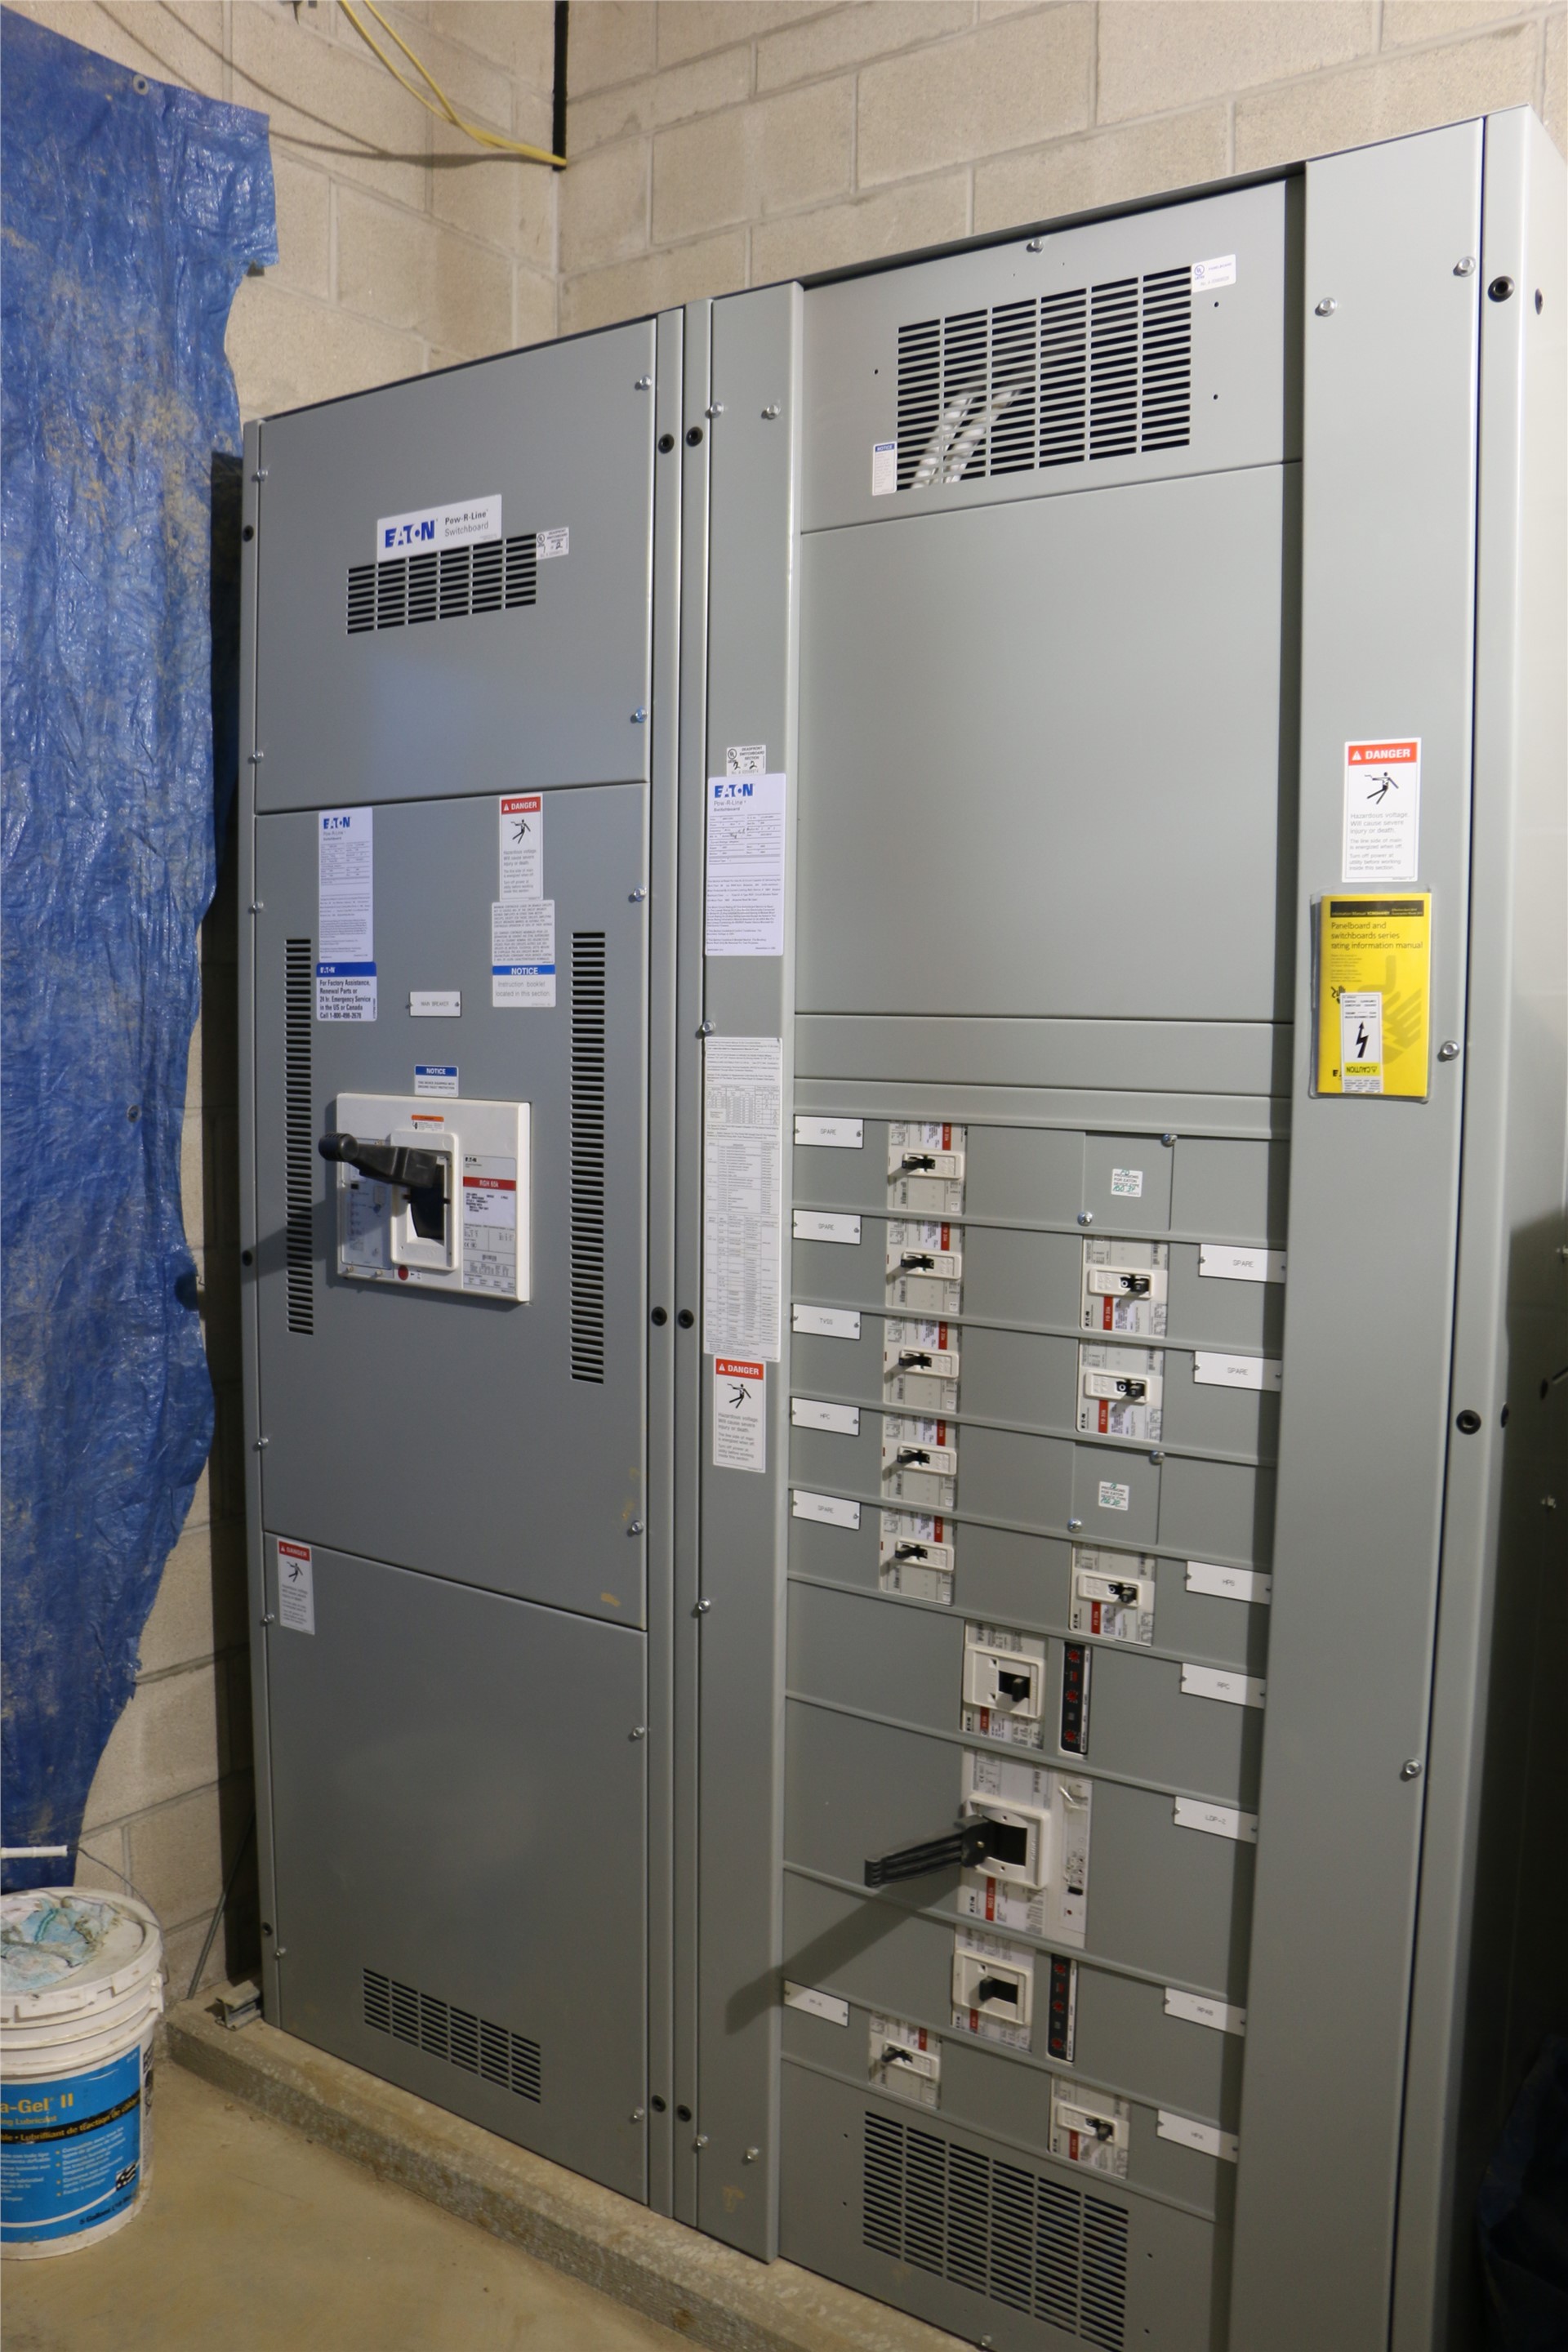 One of the main electrical panels